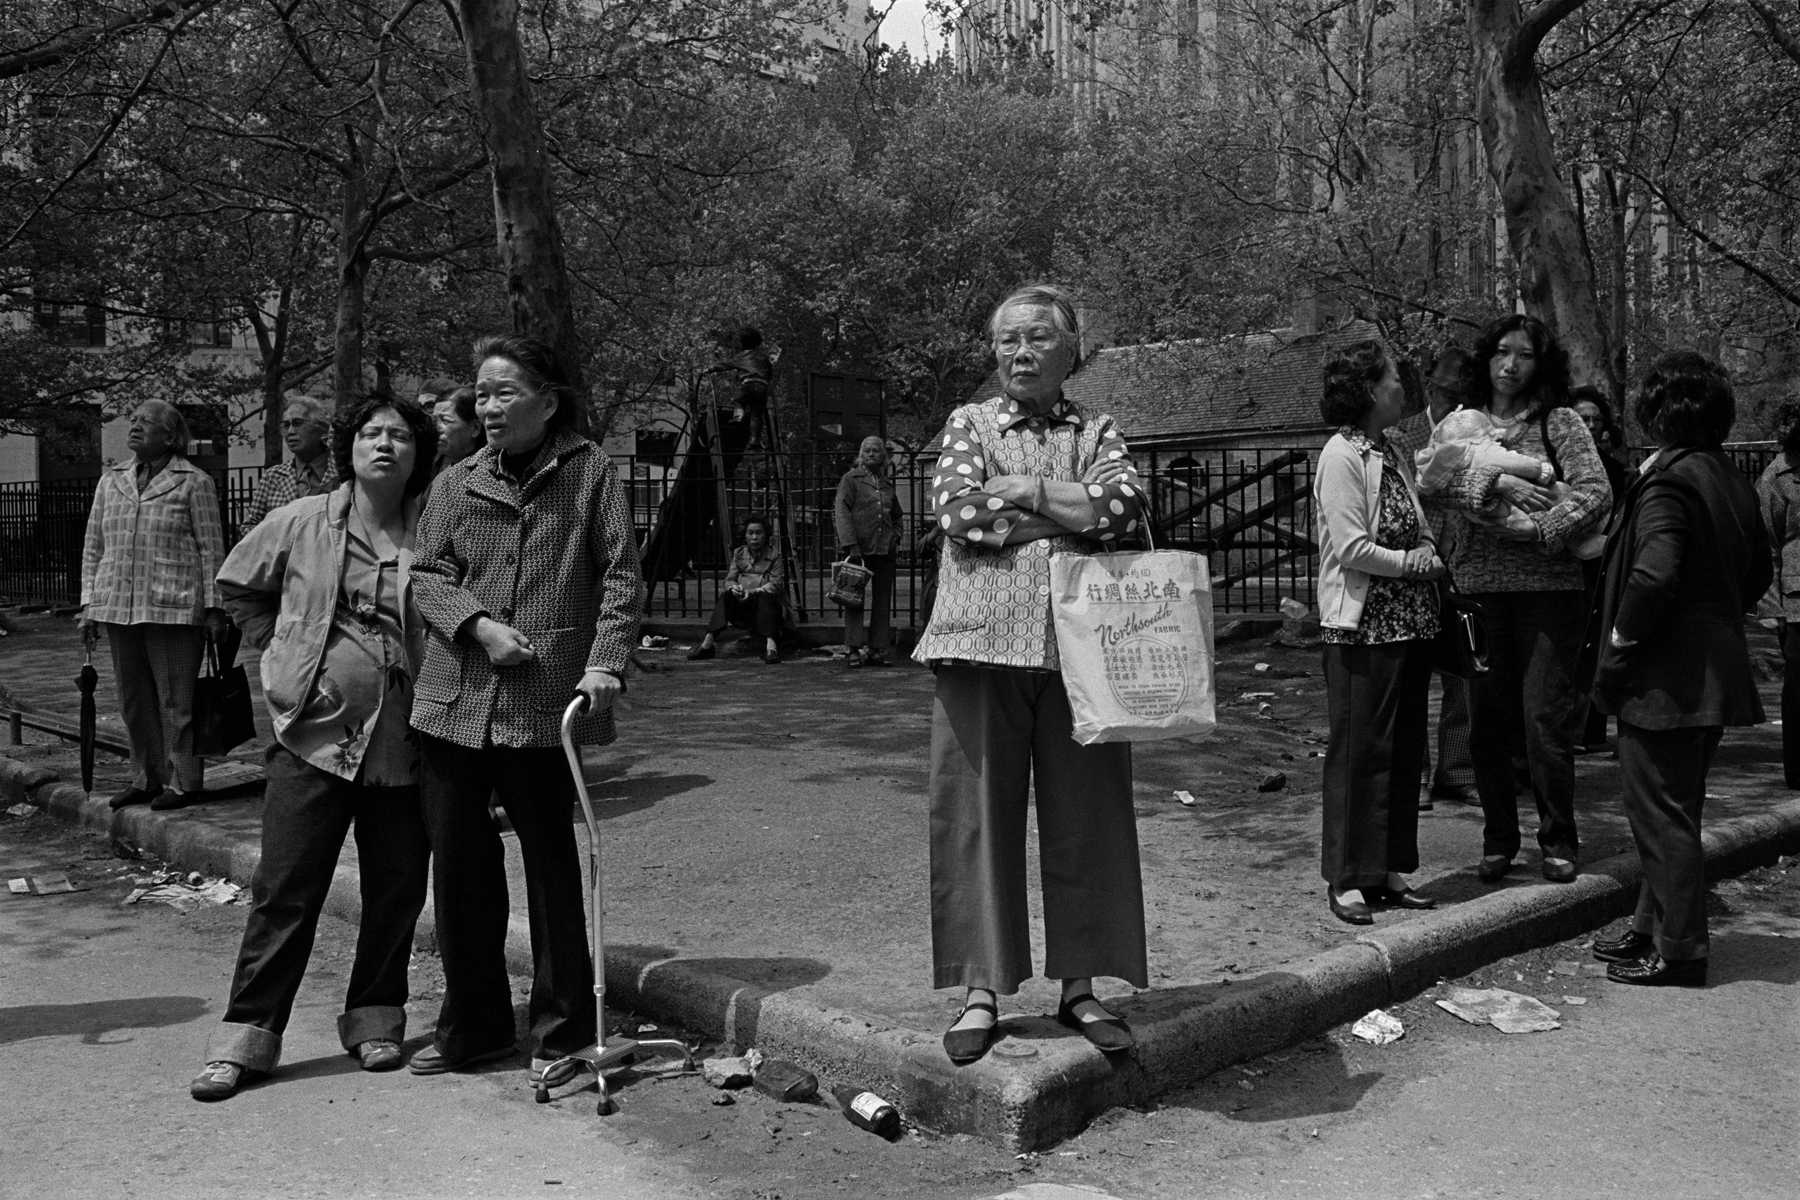 Columbus Park, Mulberry St., New York City, 1982.The women in this photograph were watching the funeral proceedings depicted in the previous photograph, directly across the street.